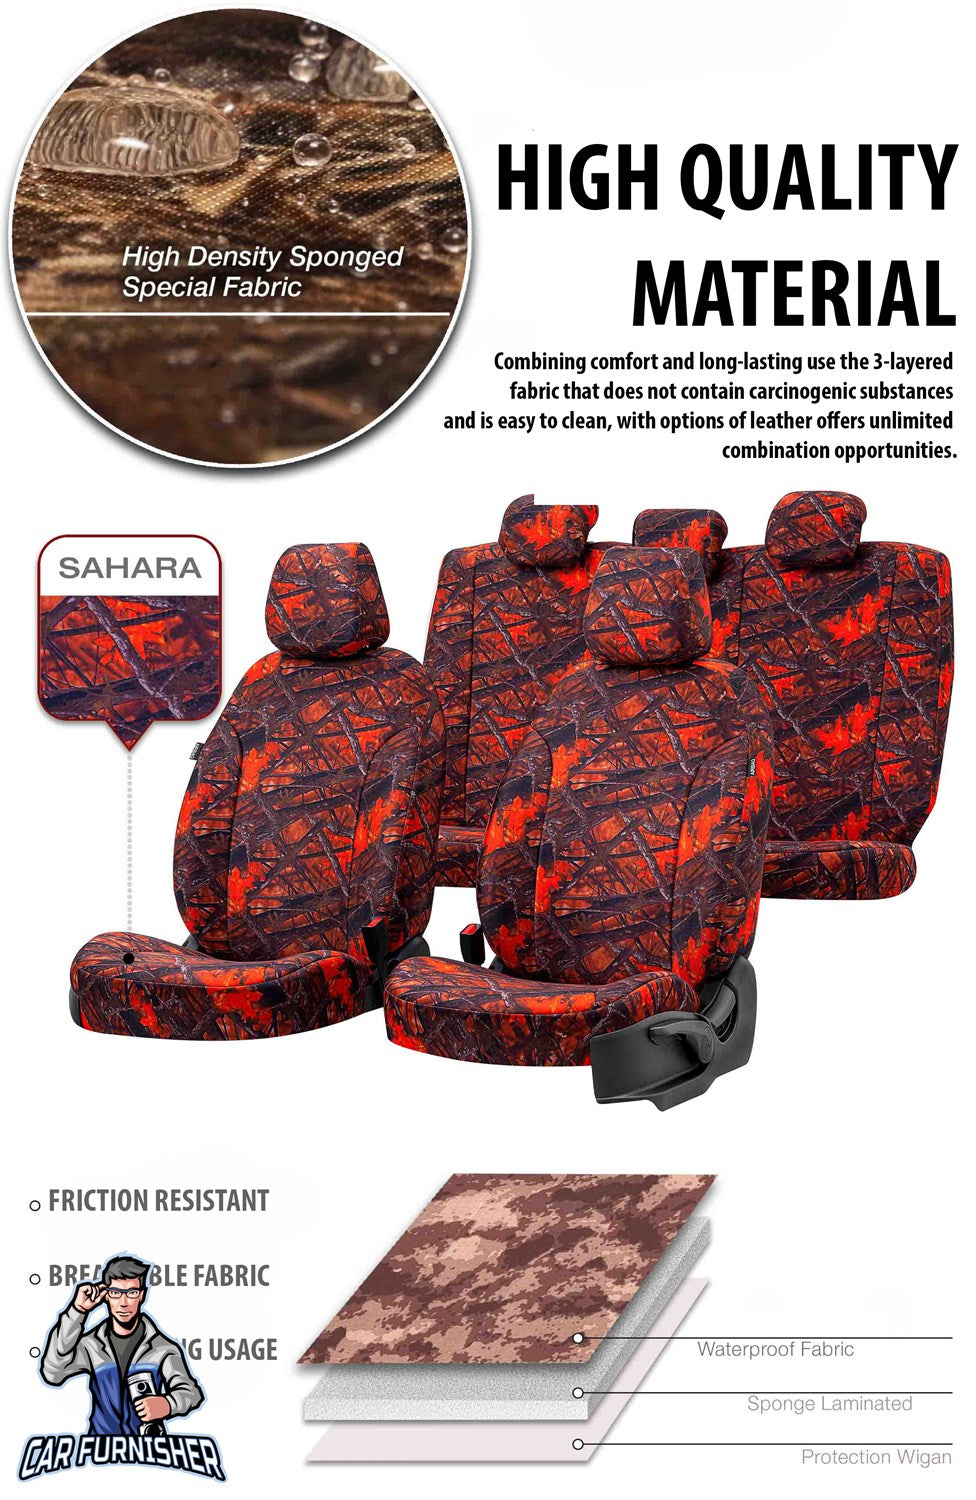 Renault Scenic Car Seat Covers 1997-2016 Camouflage Design Mojave Camo Full Set (5 Seats + Handrest) Fabric